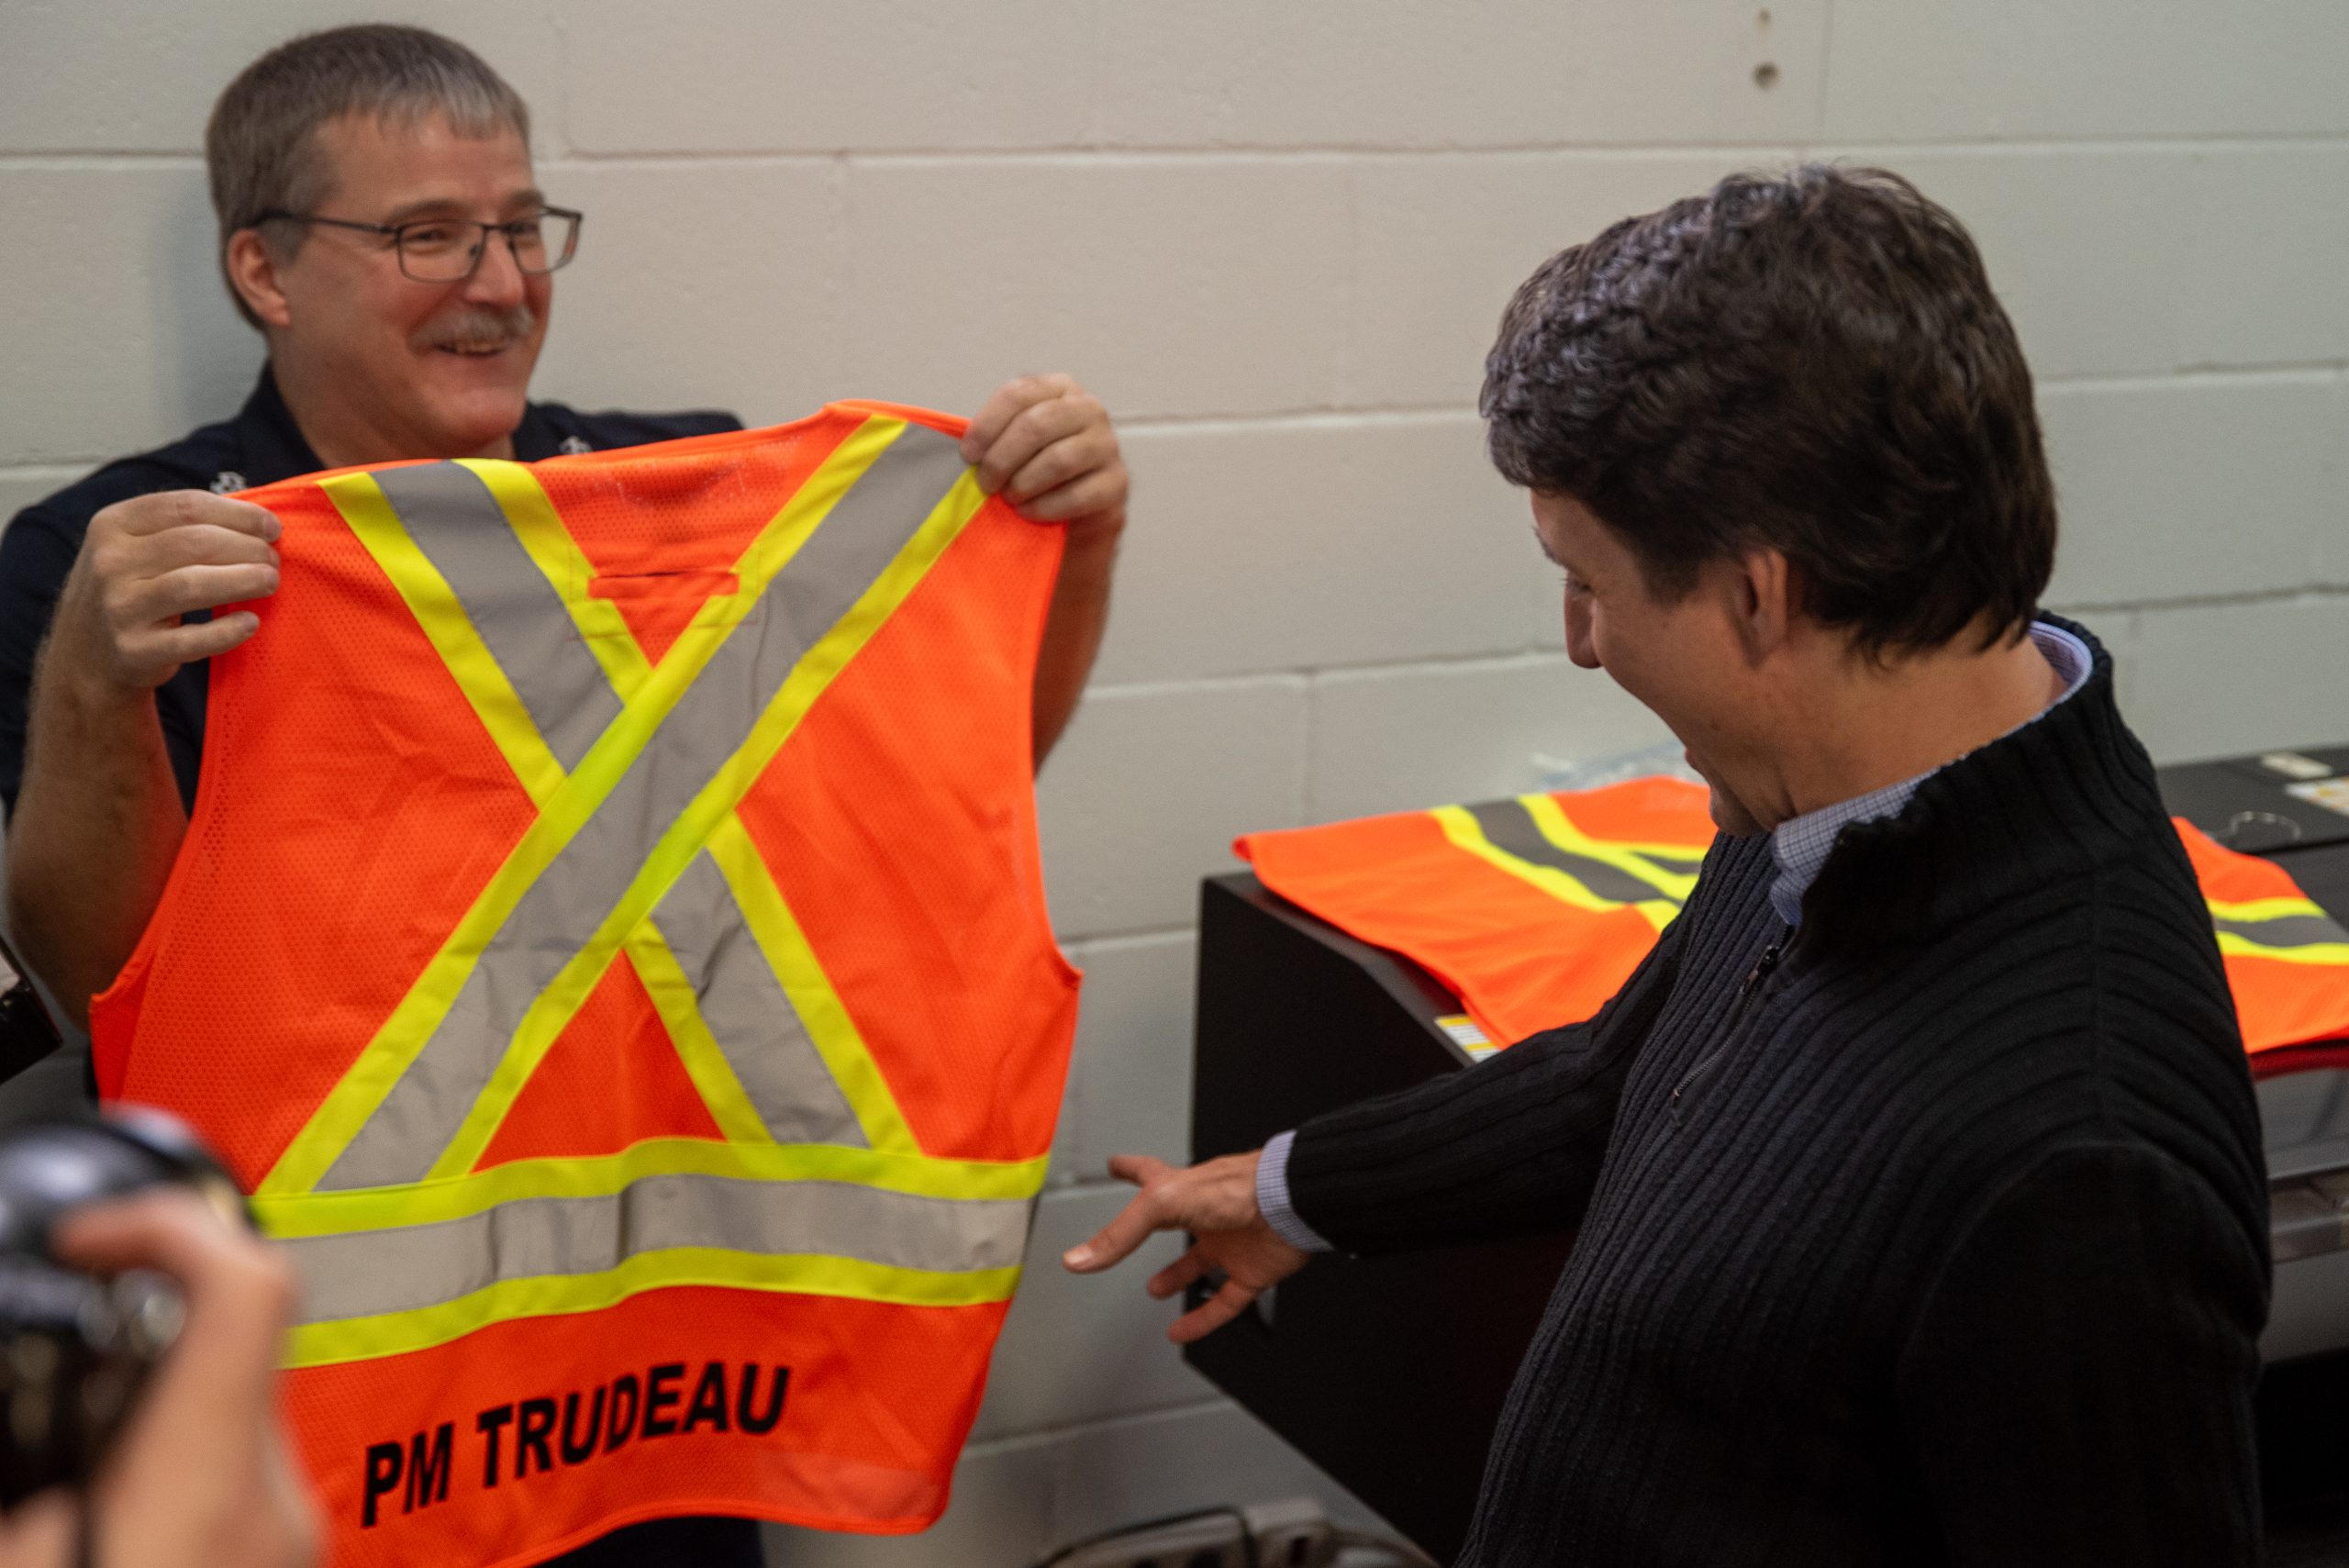 An excited Trudeau was happy to see his name on the back of a high-visibility vest. He quickly turned gift into a political win and said it would be useful to have on all the construction sites he visits as PM.